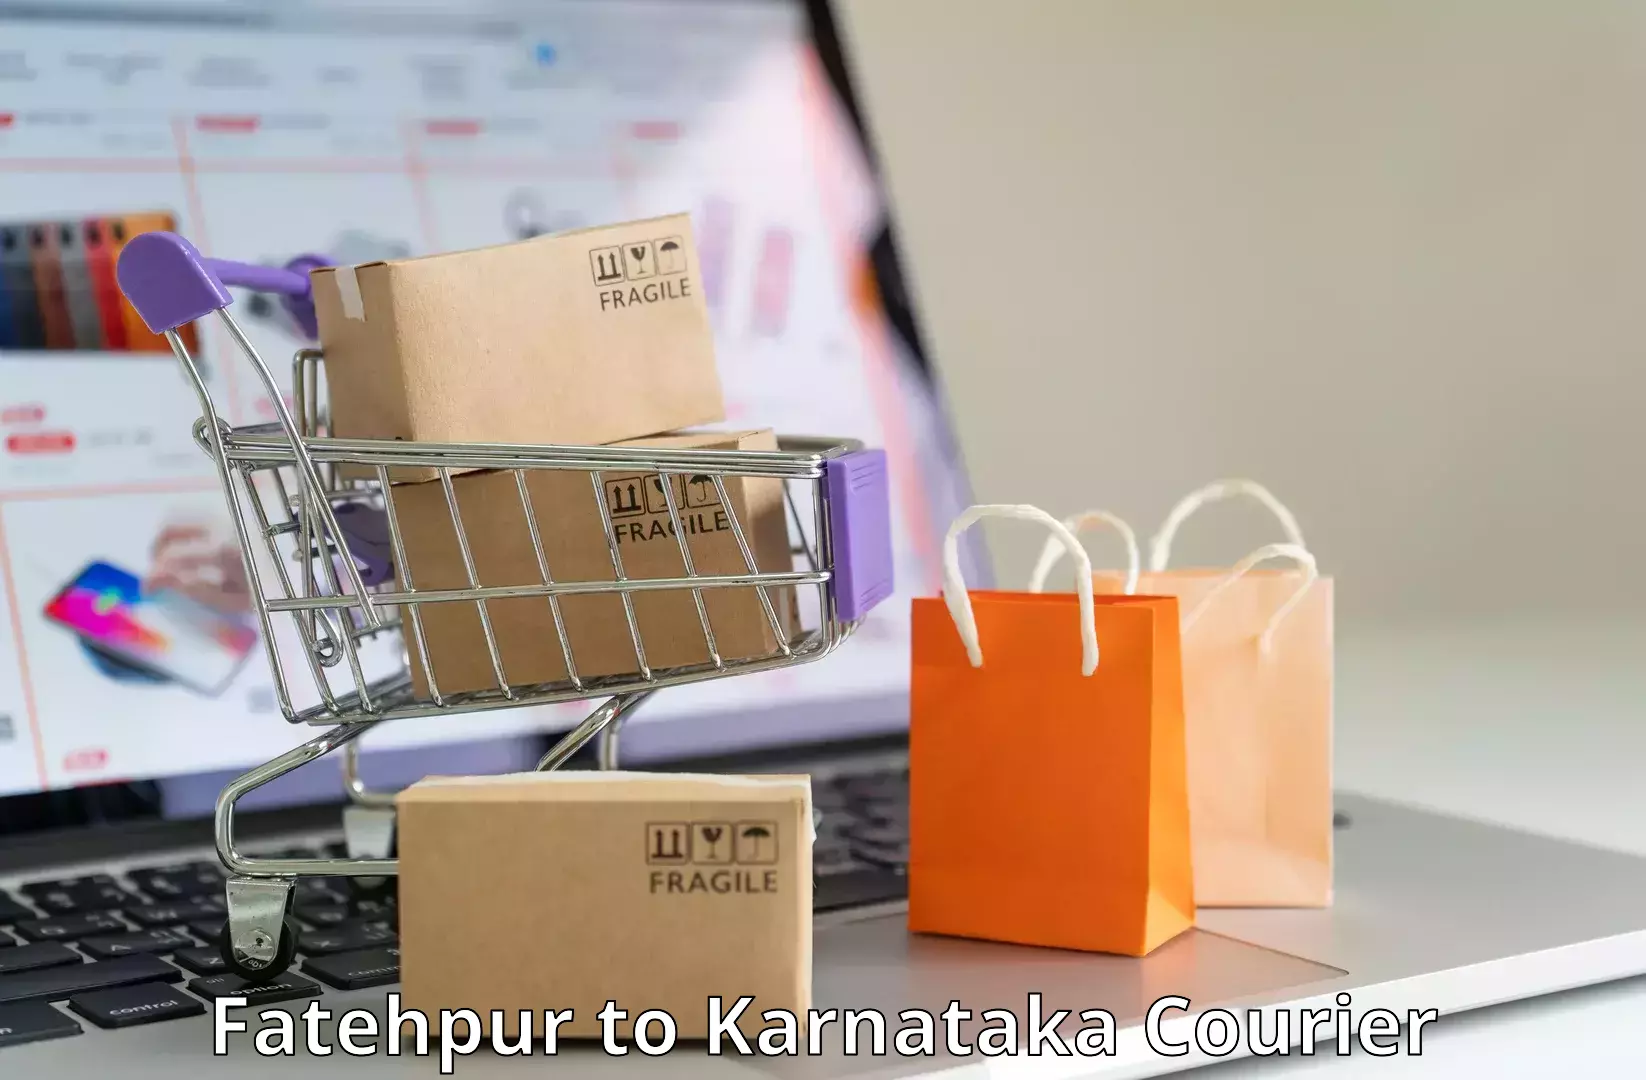 Customer-centric shipping Fatehpur to Bagalkot